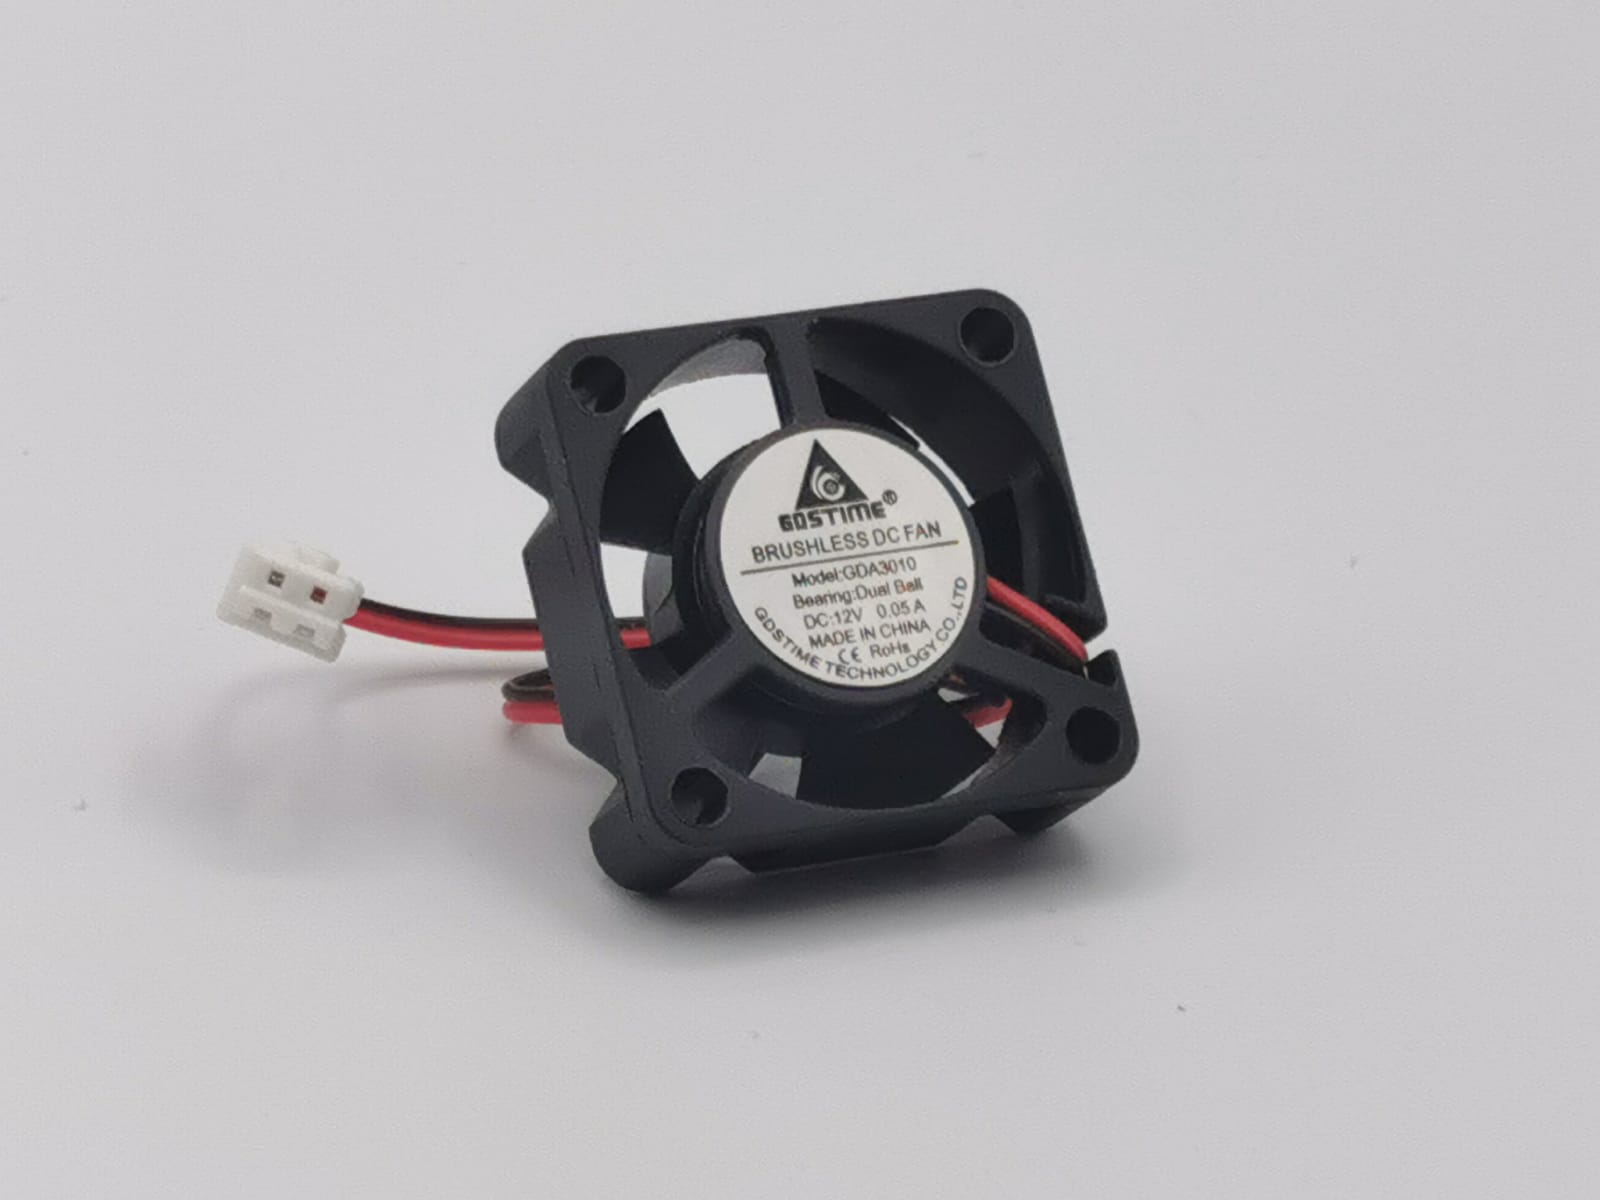 Brushless DC 3010 Axial Fans (2 pack)